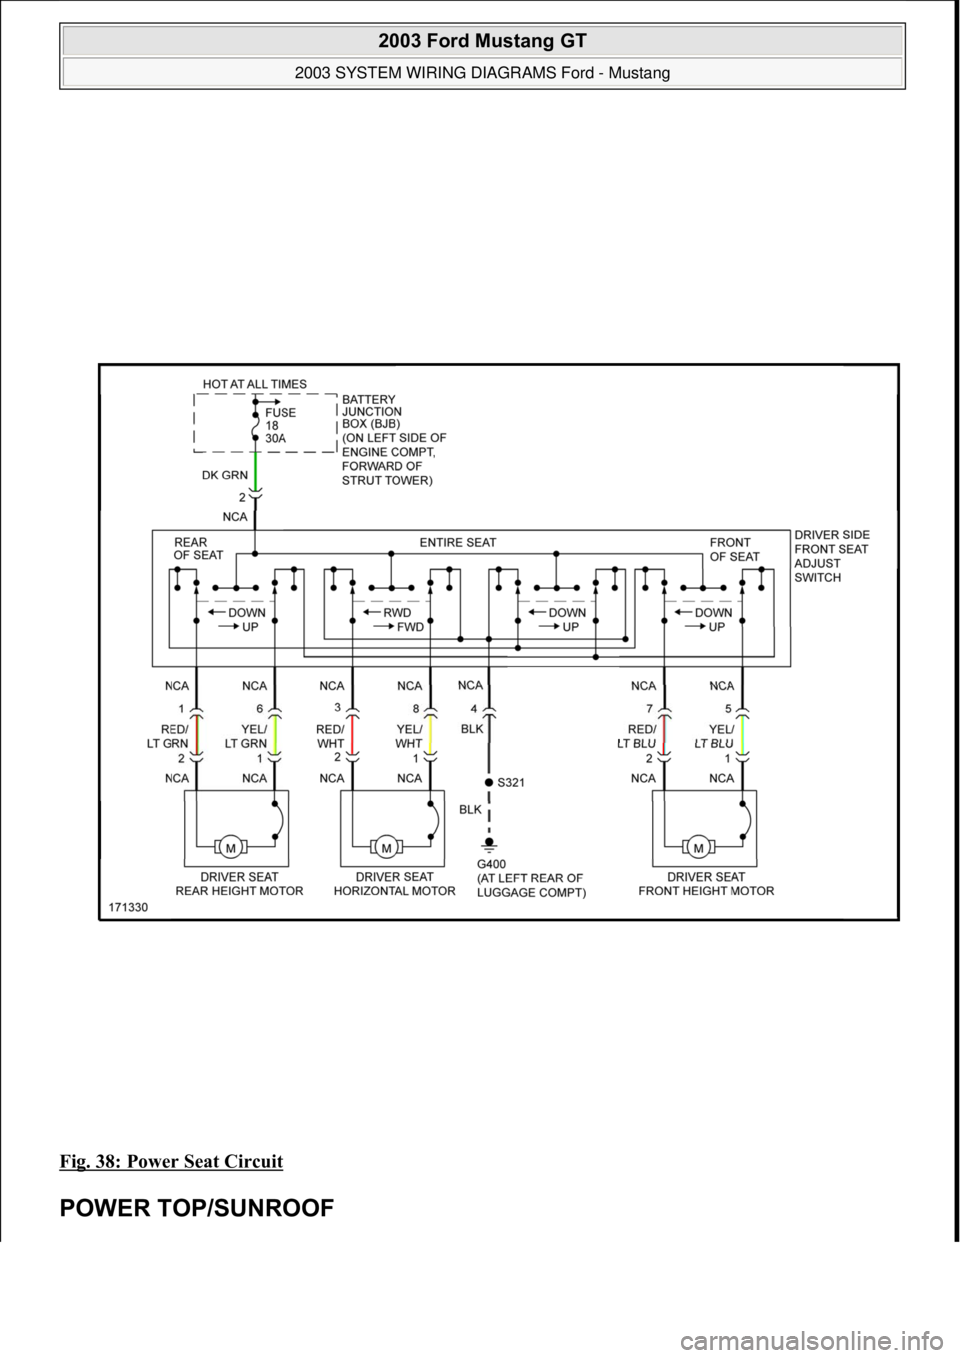 FORD MUSTANG 2003  Workshop Manual Fig. 38: Power Seat Circuit 
POWER TOP/SUNROOF 
 
2003 Ford Mustang GT 
2003 SYSTEM WIRING DIAGRAMS Ford - Mustang  
111  
18 ноября  2011 г. 12:50:34Page 39 © 2006 Mitchell Repair Information